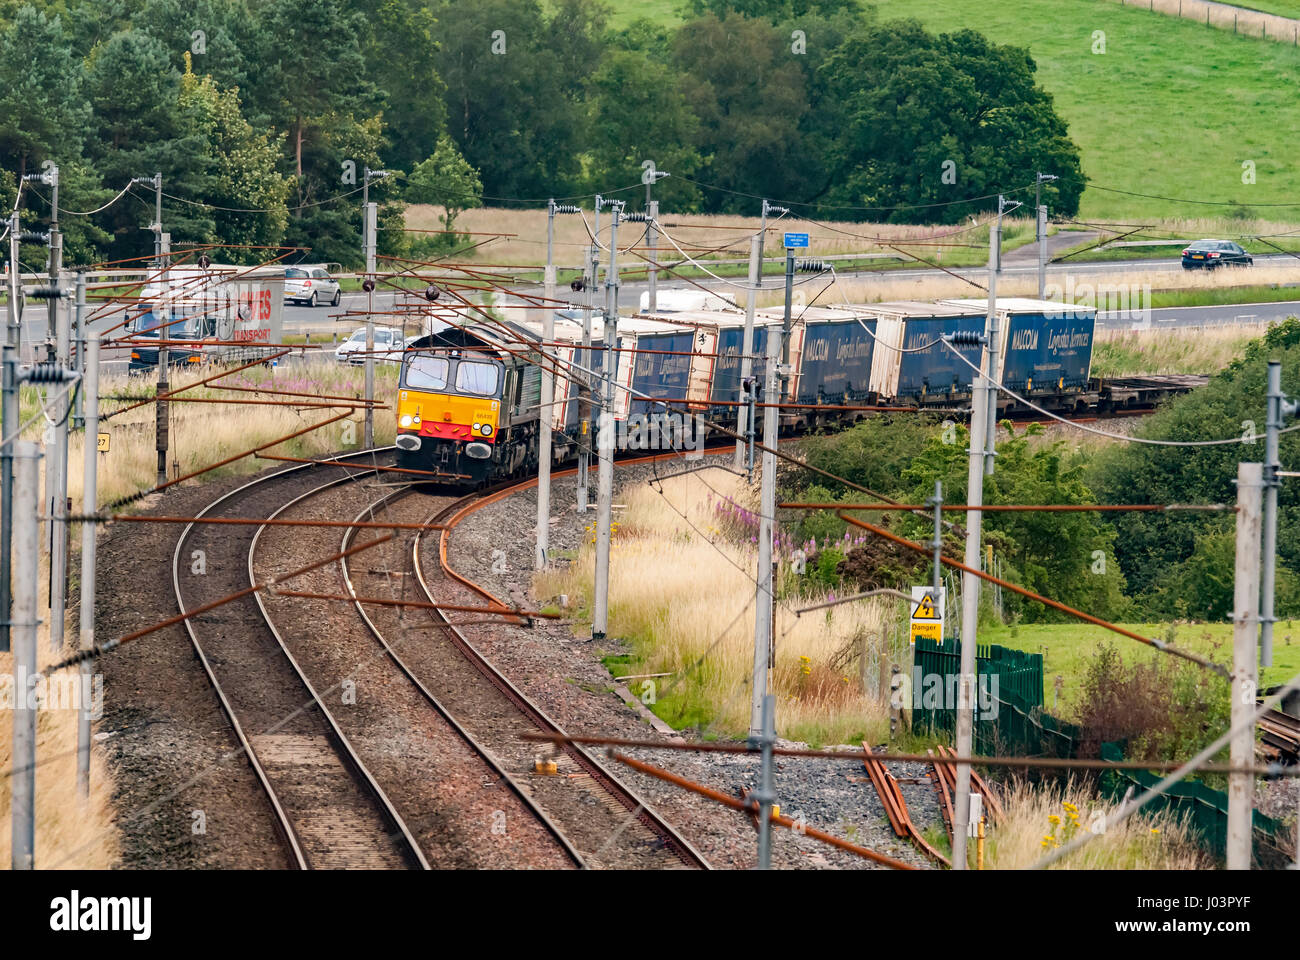 Class 66 locomotive hauling freightliner wagons on the West Coast Main Line in Cumbria passing the M6 motorway. Stock Photo